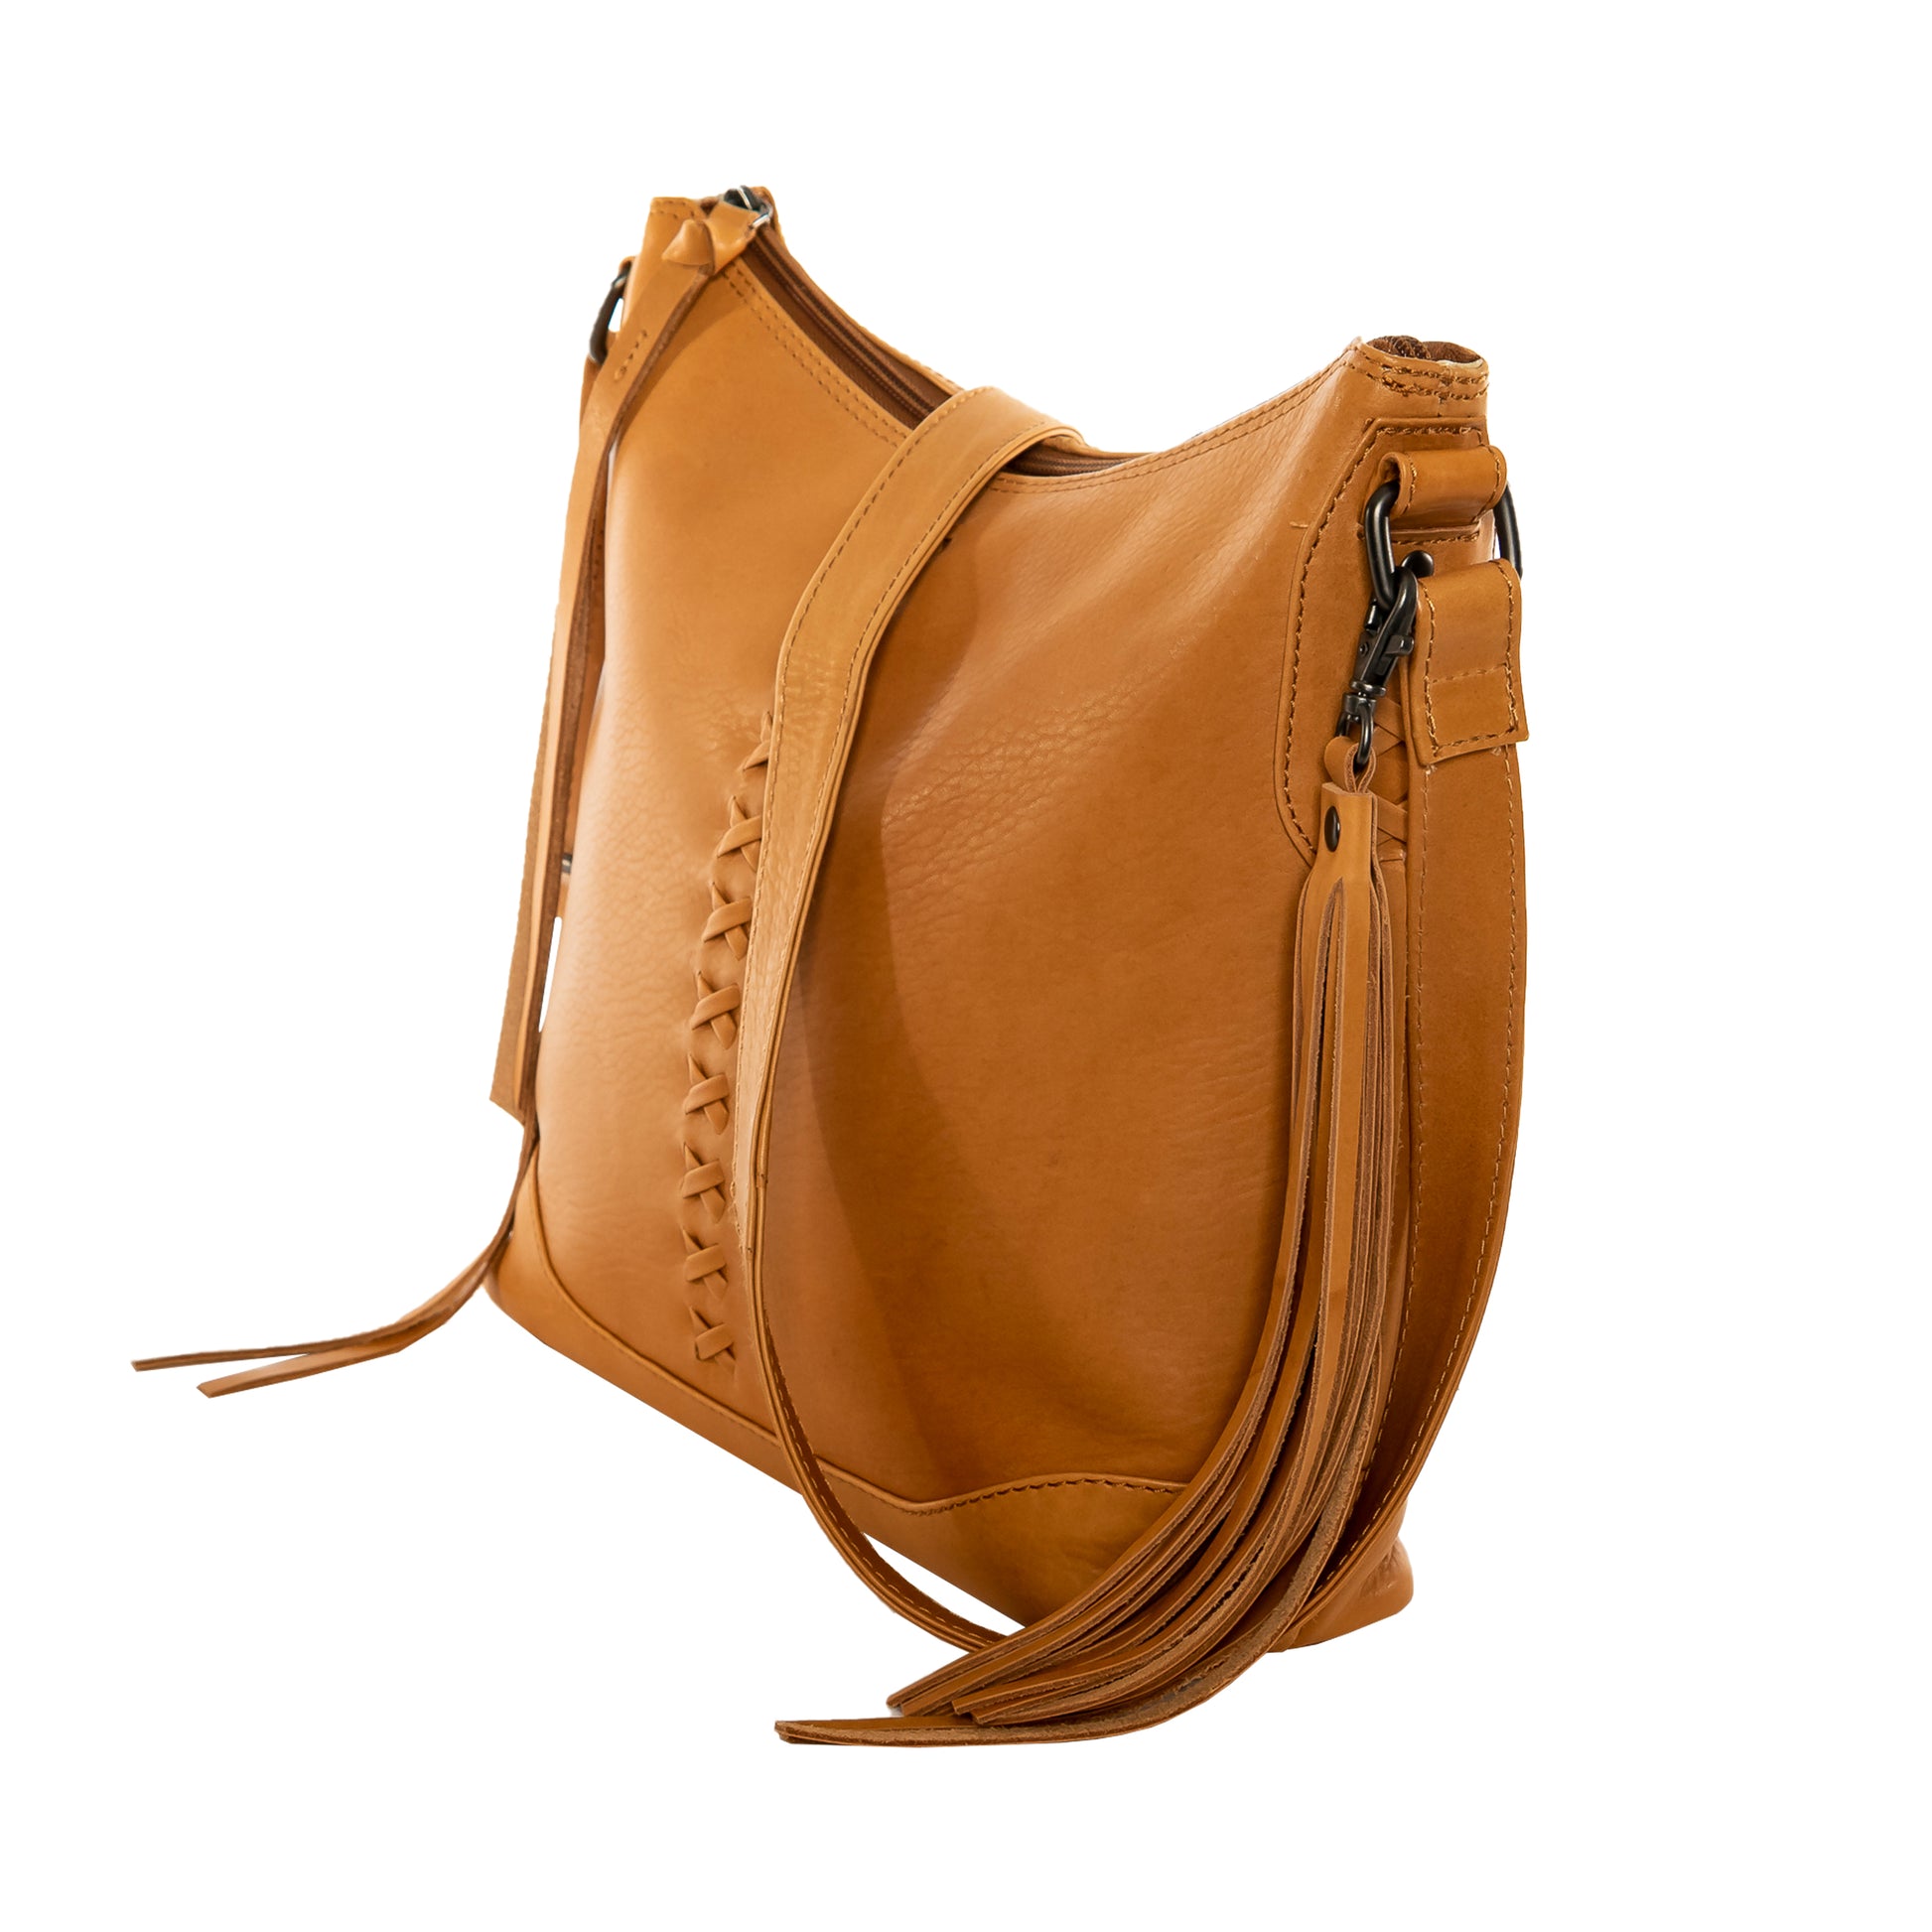 Concealed Carry Brynn Arched Leather Crossbody